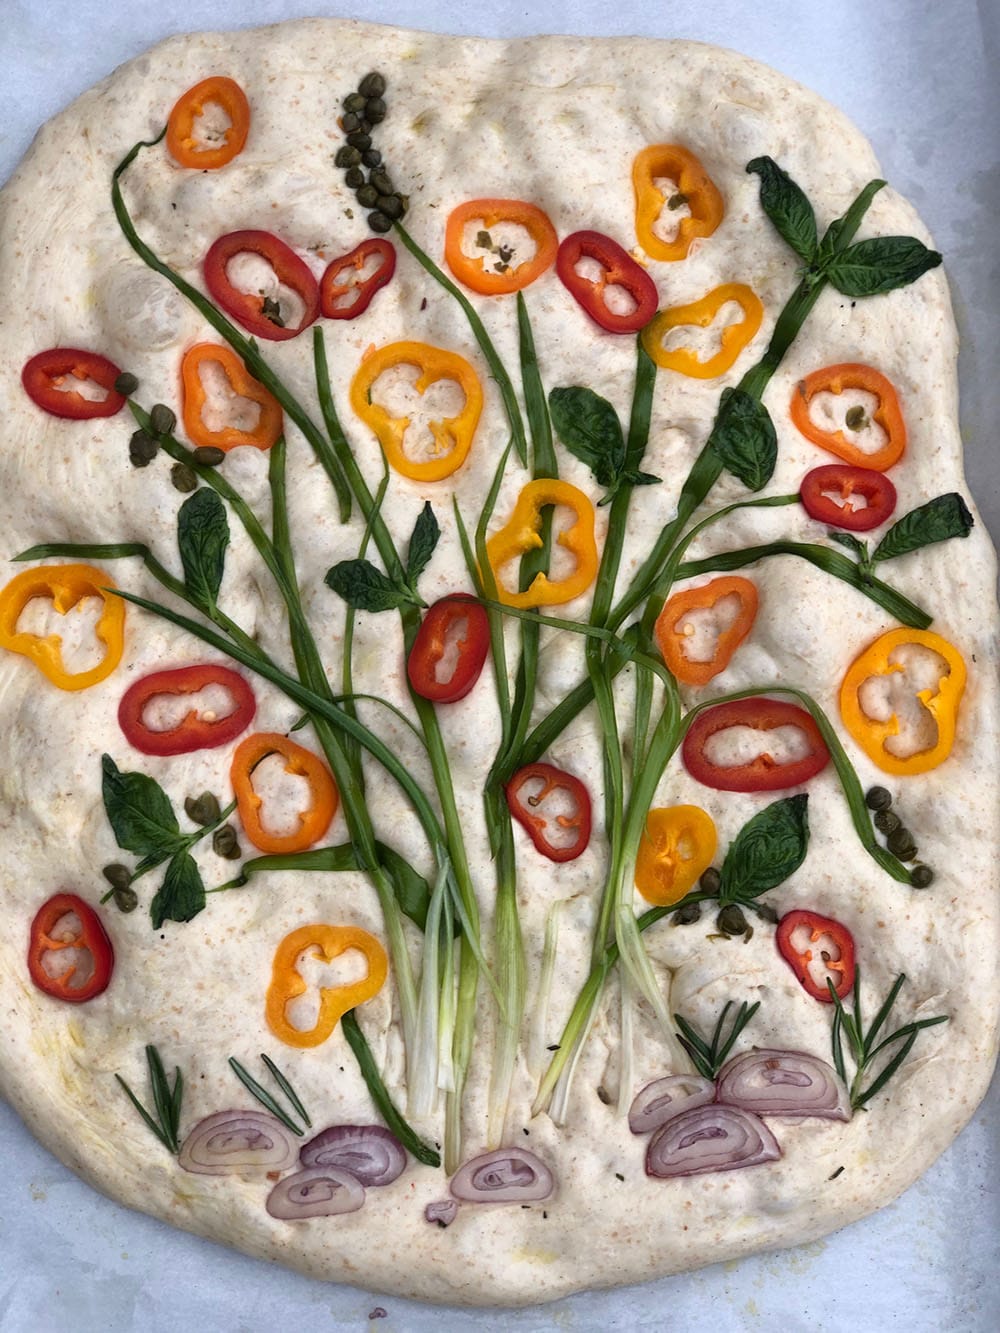 focaccia bread with sliced bell peppers, chives, herbs and shallots shot from above